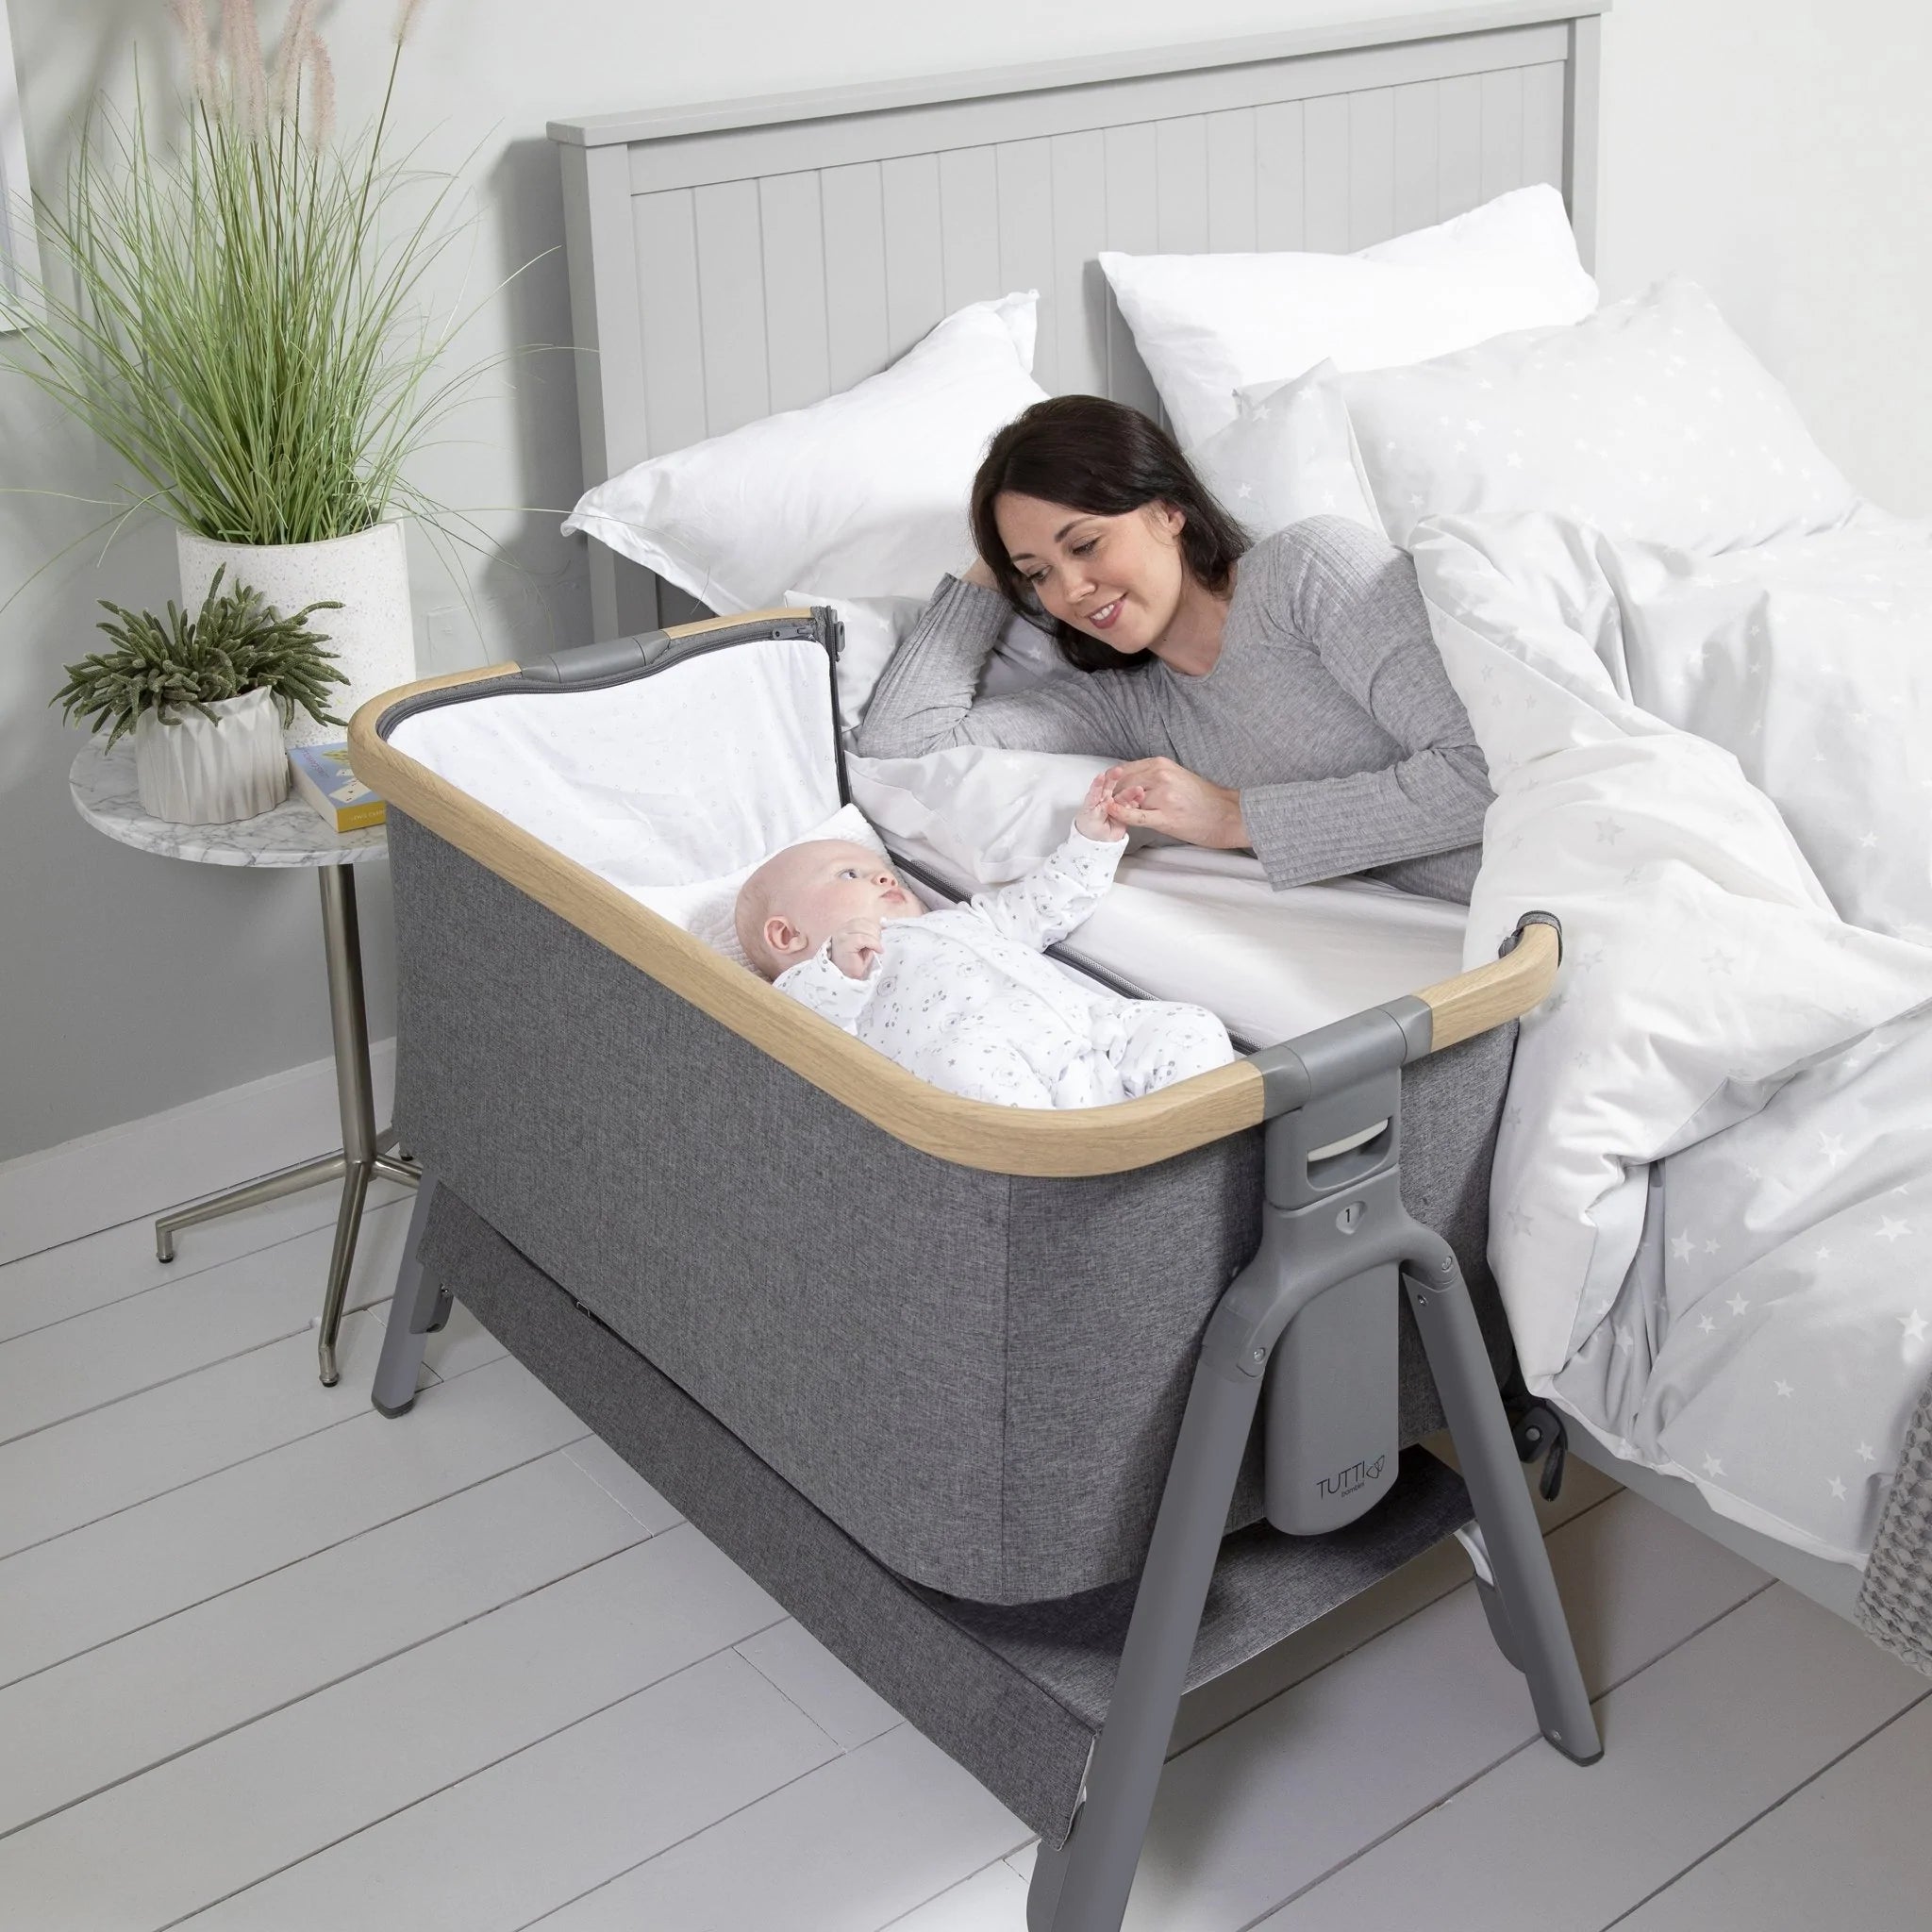 Safe, Sweet Dreams for Your Baby: Tutti Bambini Cozee Cribs